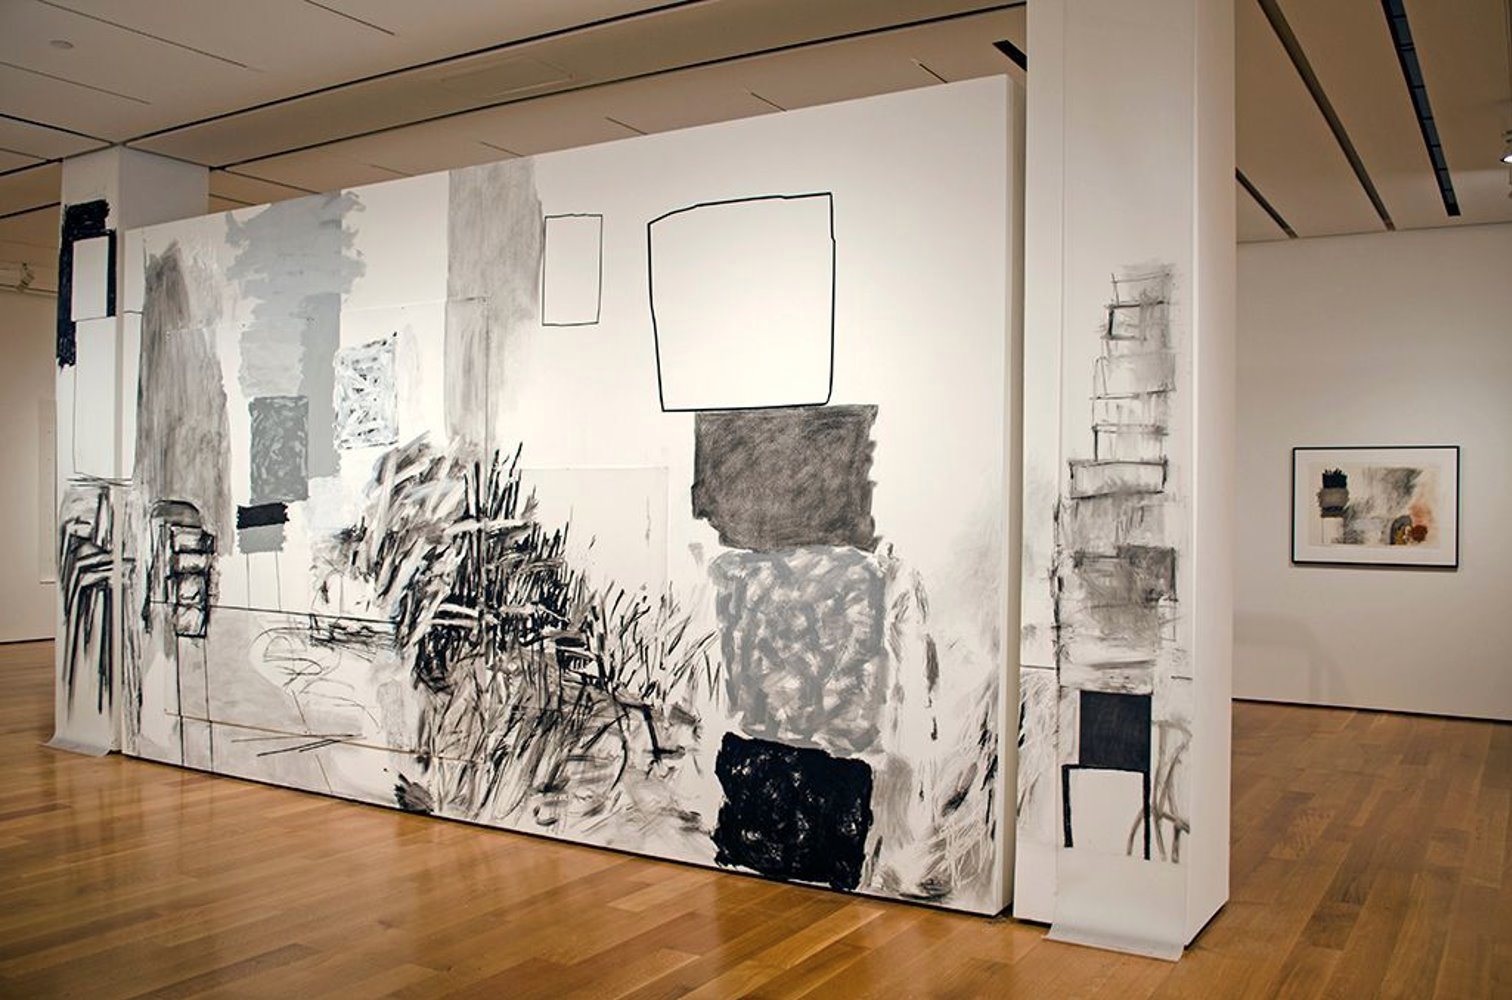  Rocio Rodriguez,  In and Out,  2013. Charcoal, graphite, acrylic paint, tape, vellum paper, High Museum of art site specific installation​ 